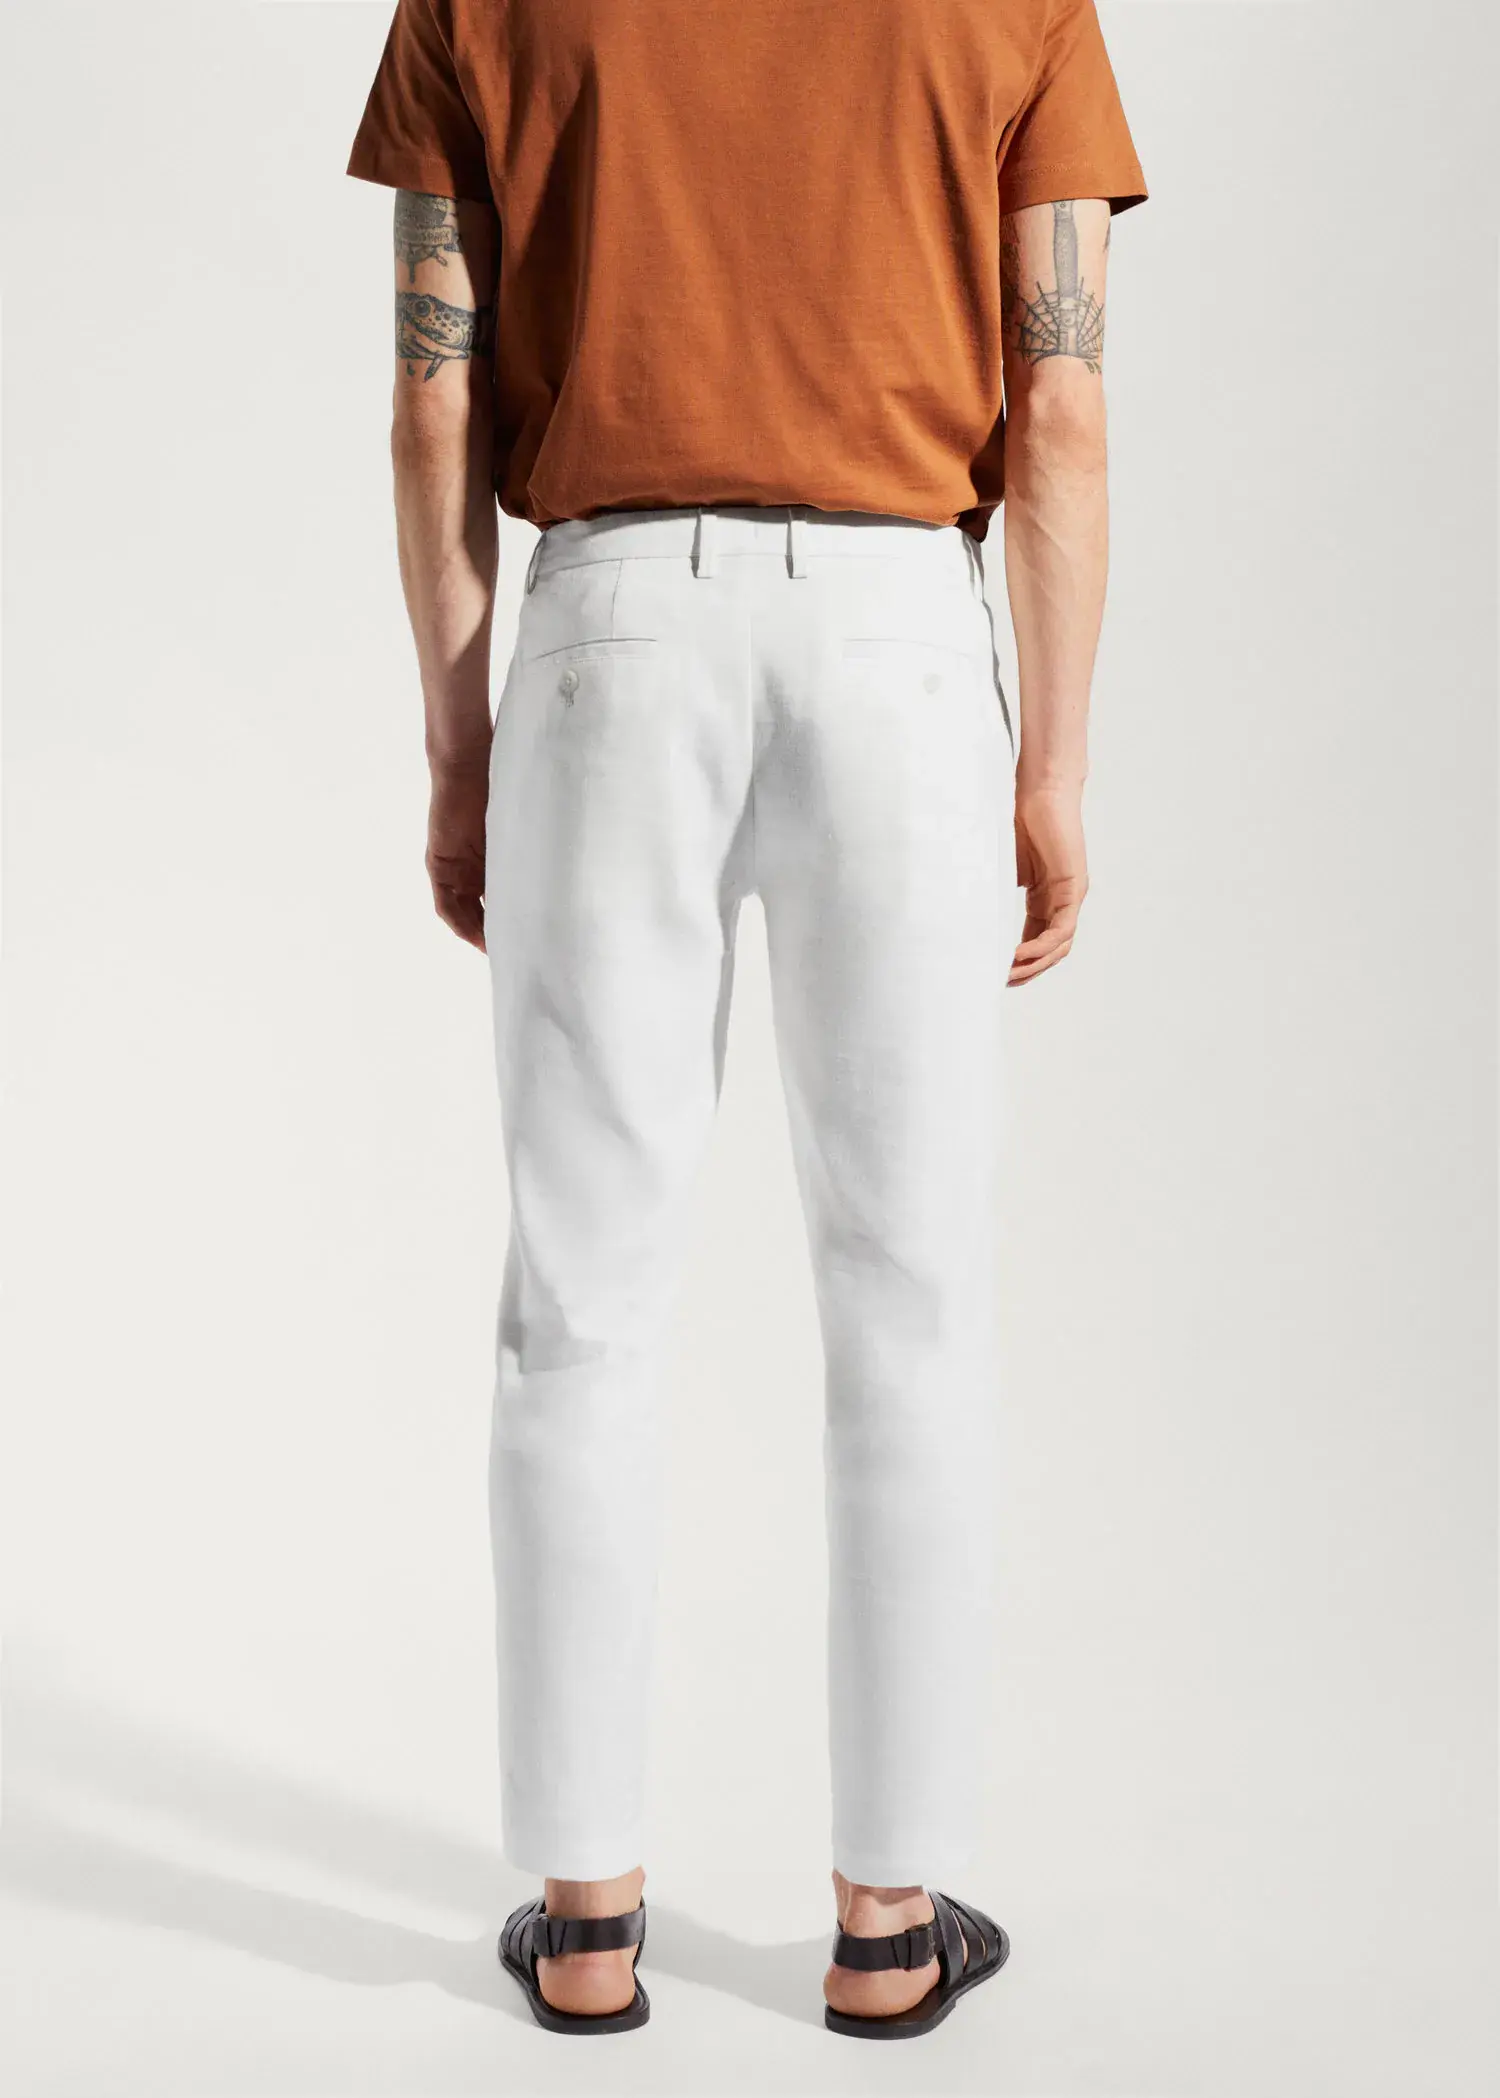 Mango Linen slim-fit pants with inner drawstring. a person wearing white pants and a brown shirt. 